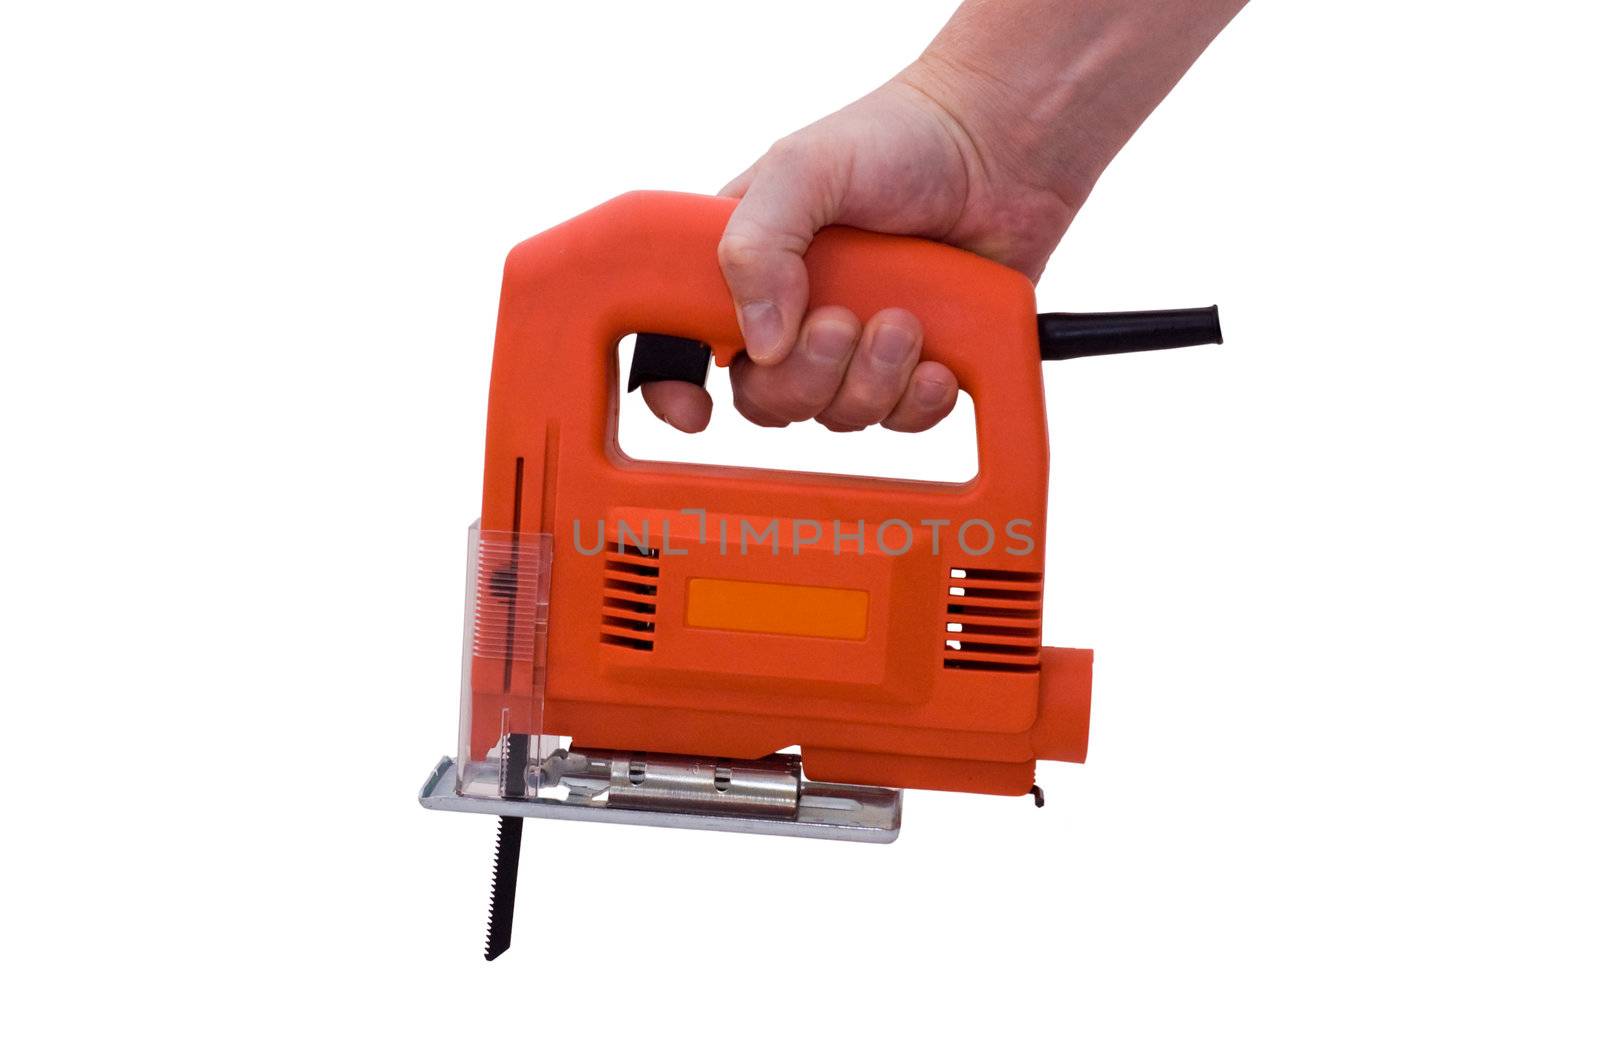 an isolated over white image of a caucasian mans hand holding an orange electric jigsaw.

(please do not mistake the texture of the tool for noise)